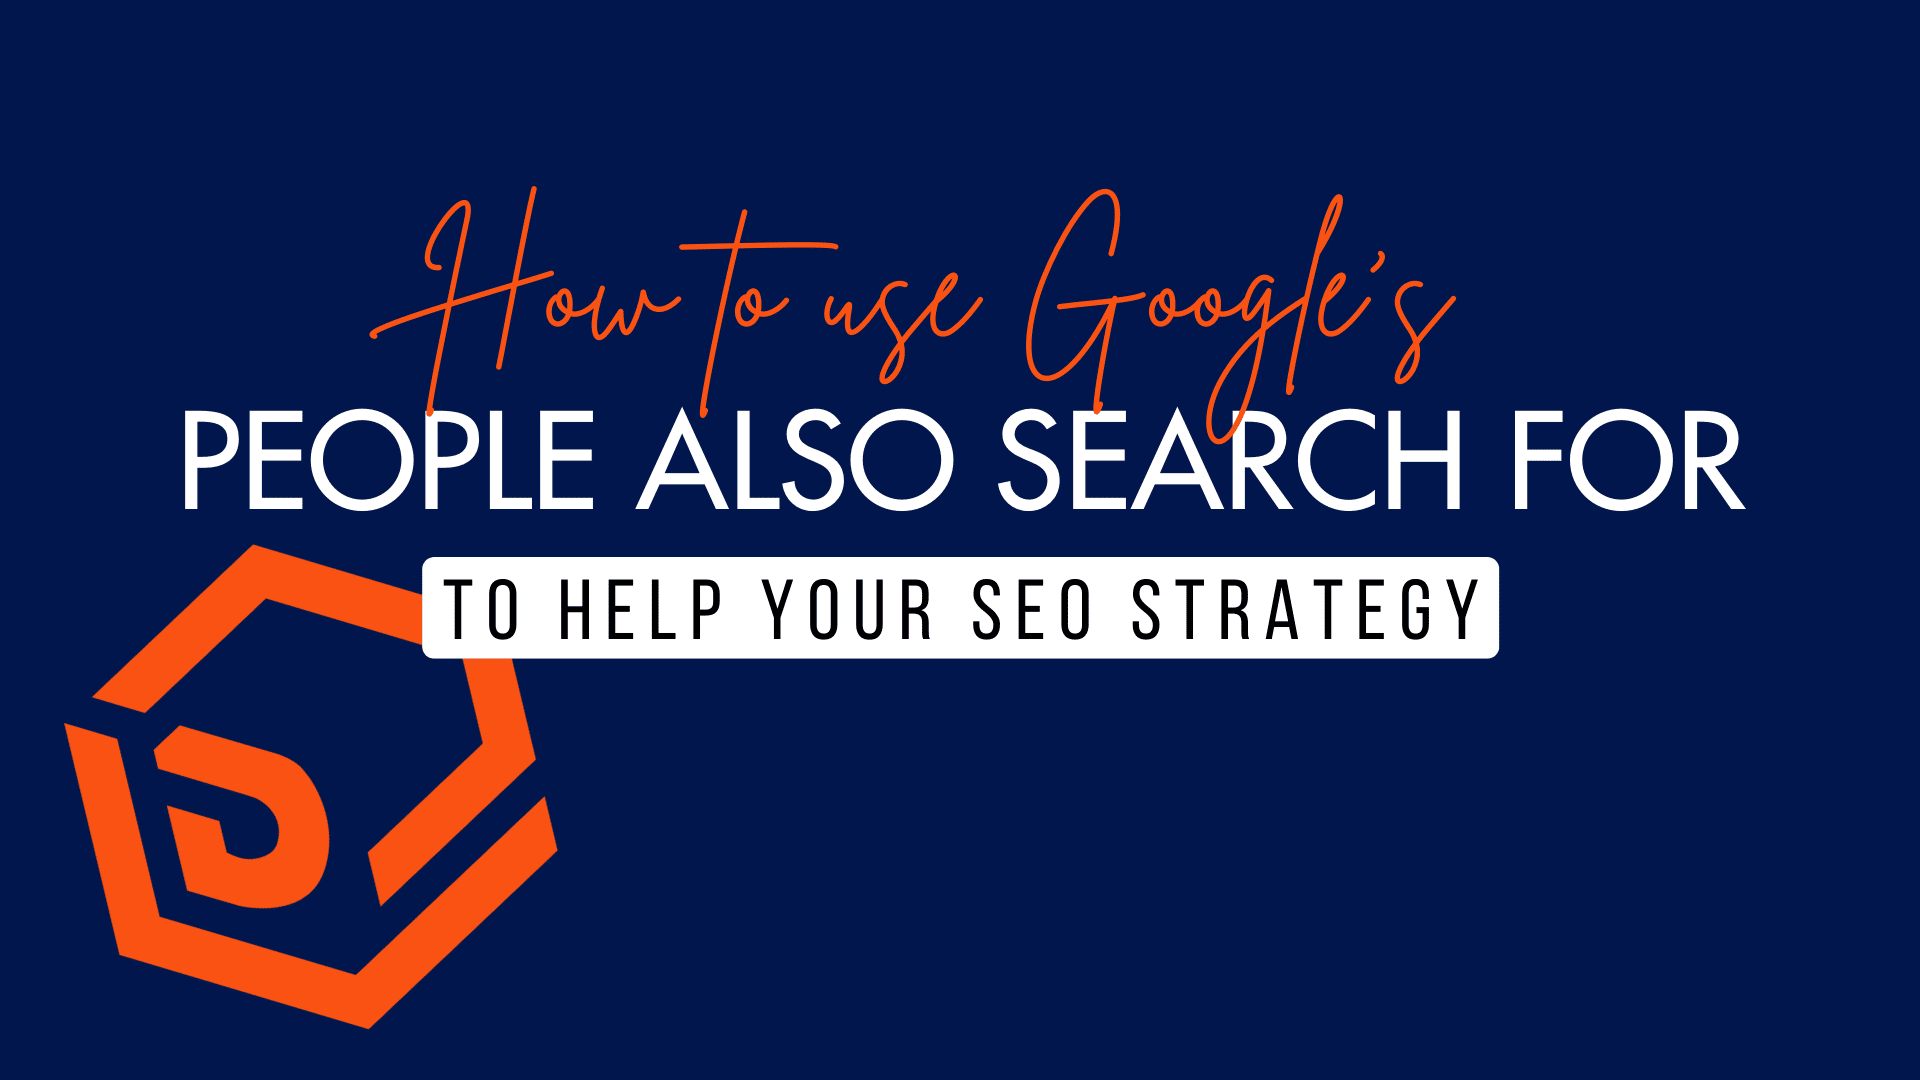 How to Use Google's People Also Search For to Help Your SEO Strategy